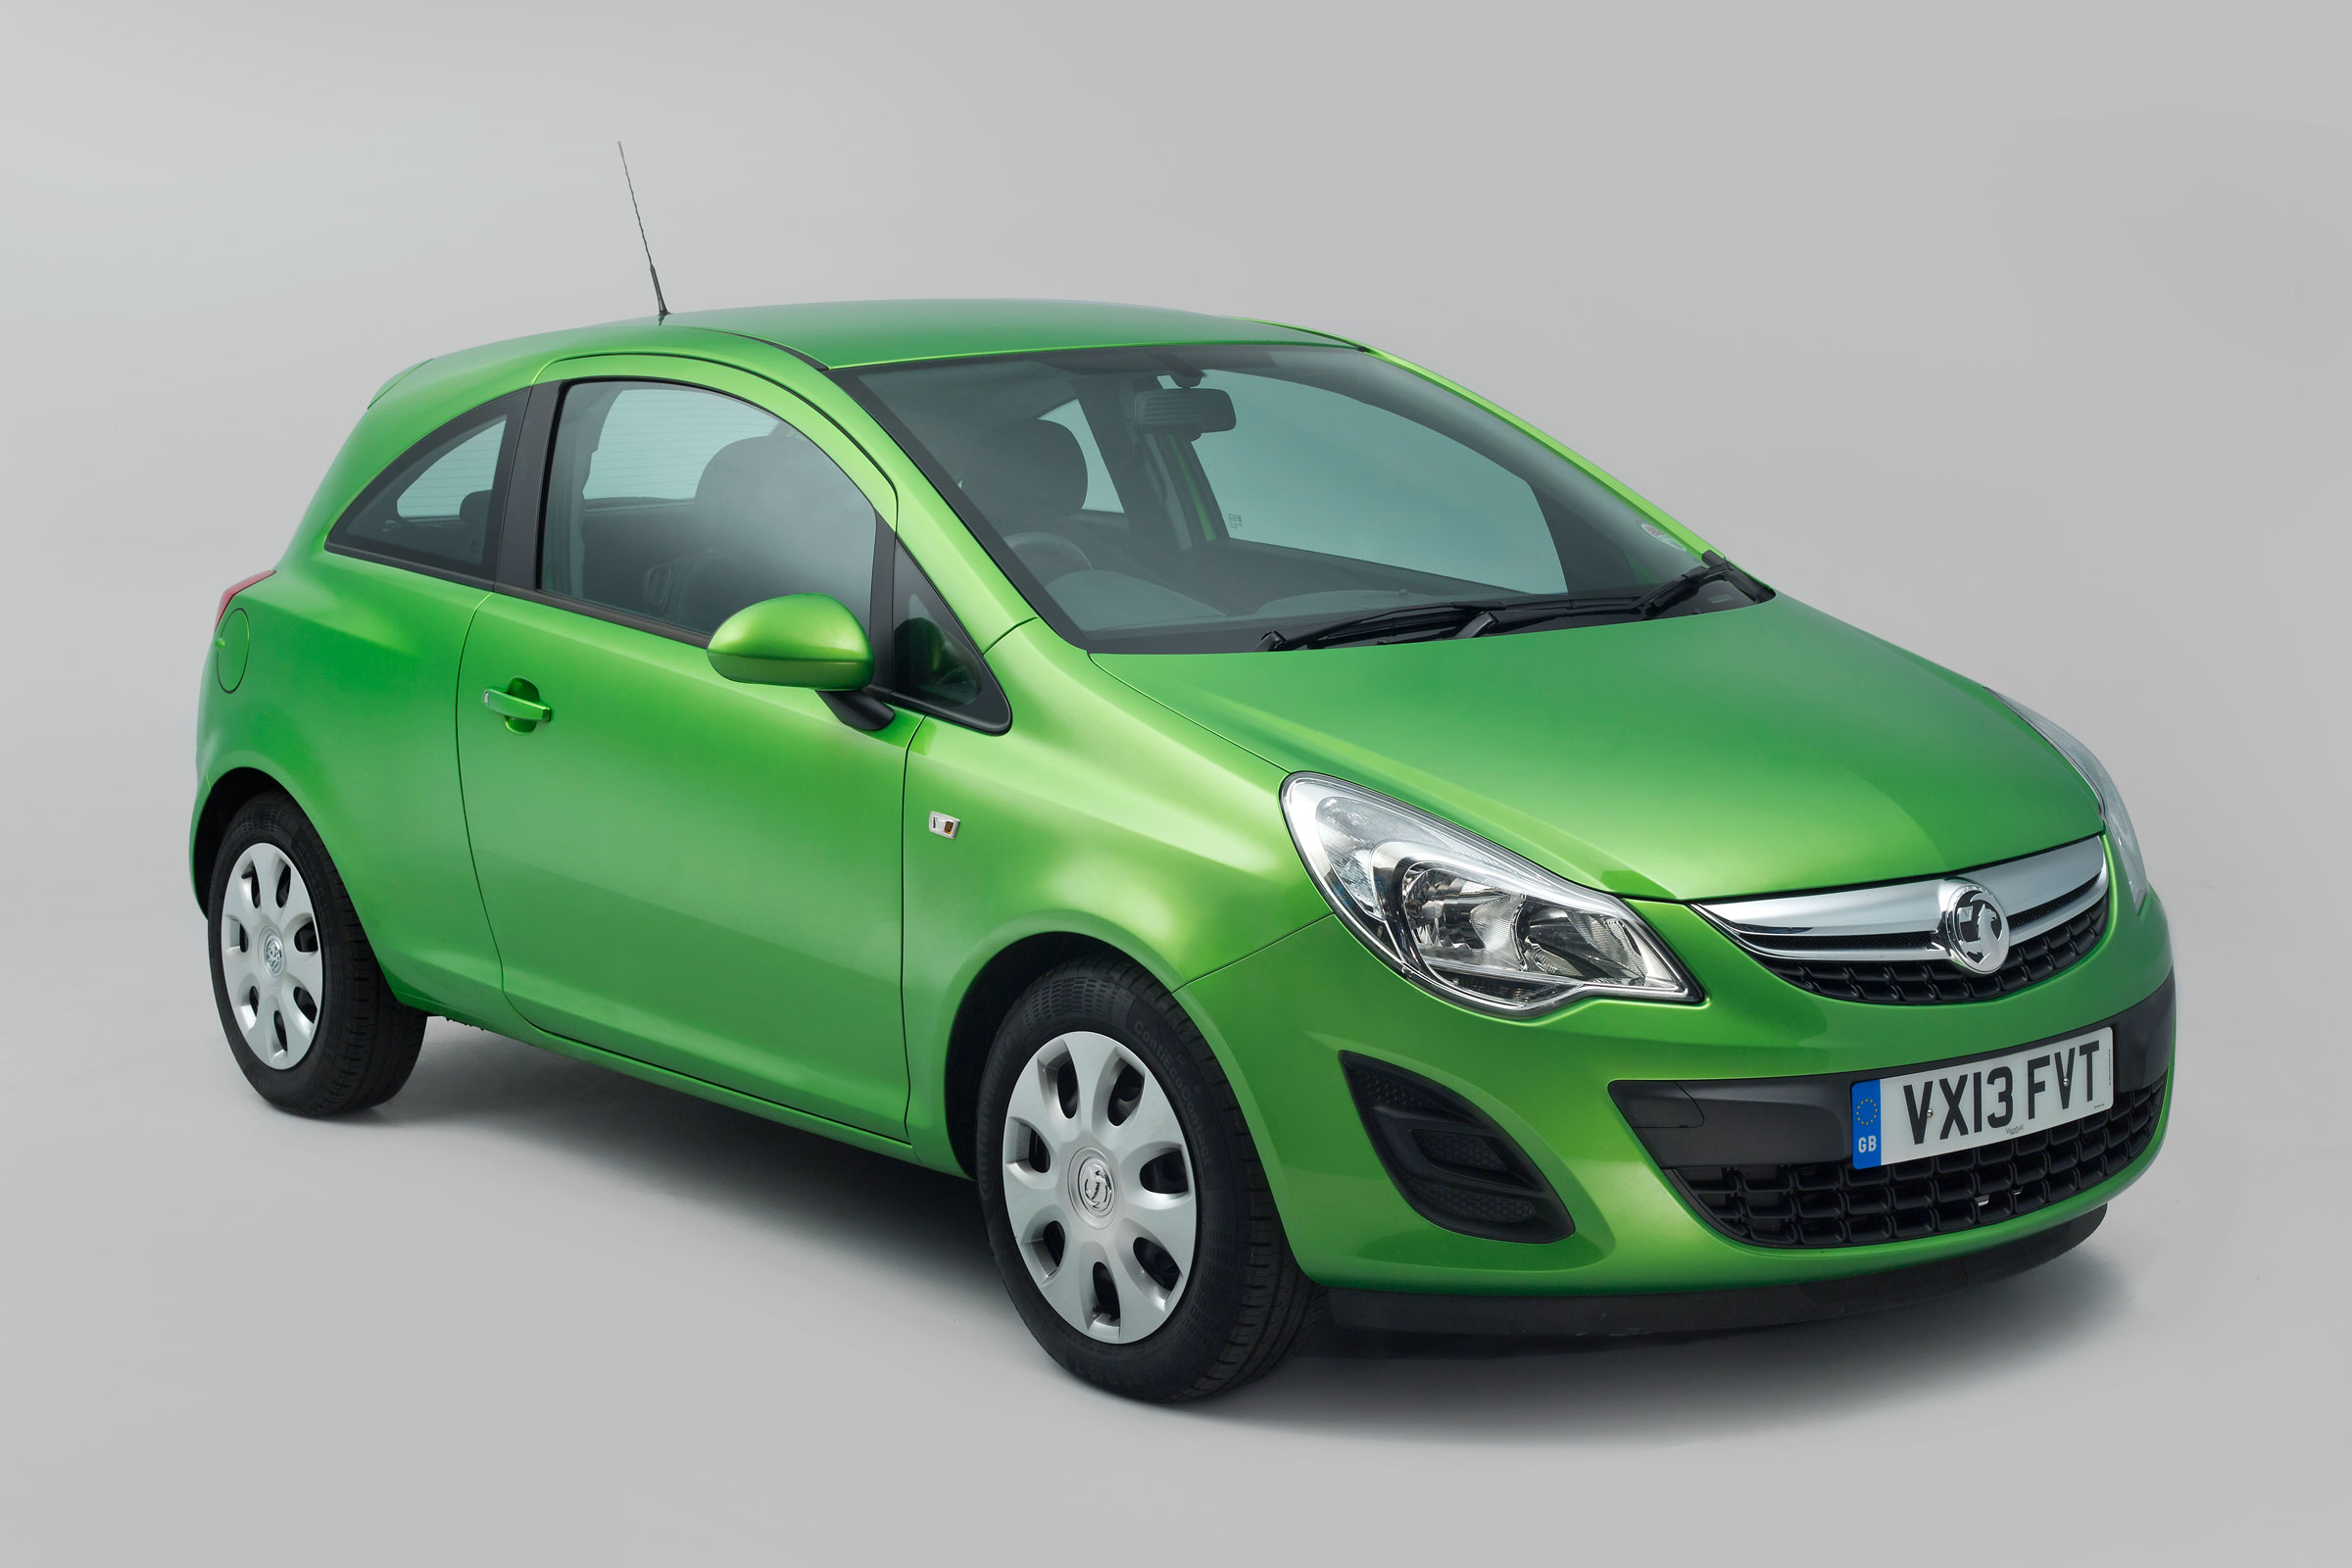 Opel Corsa SRi 1.2 review: putting fun on ICE - Driven Car Guide